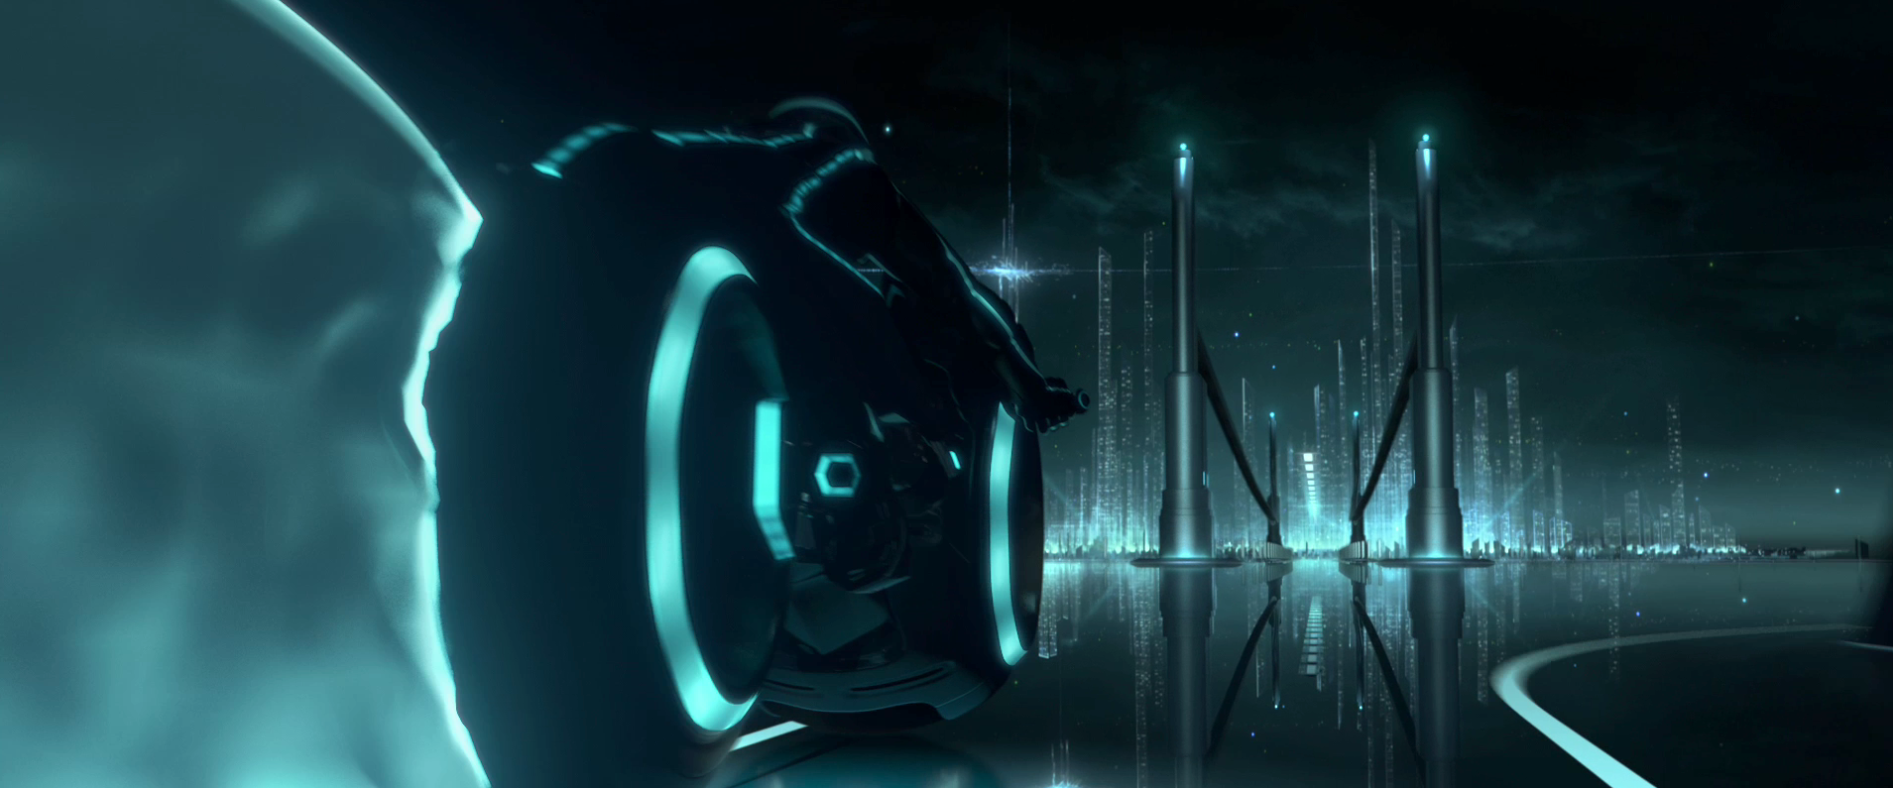 Tron Legacy Light Cycle Bridge wallpaper   Click picture for high